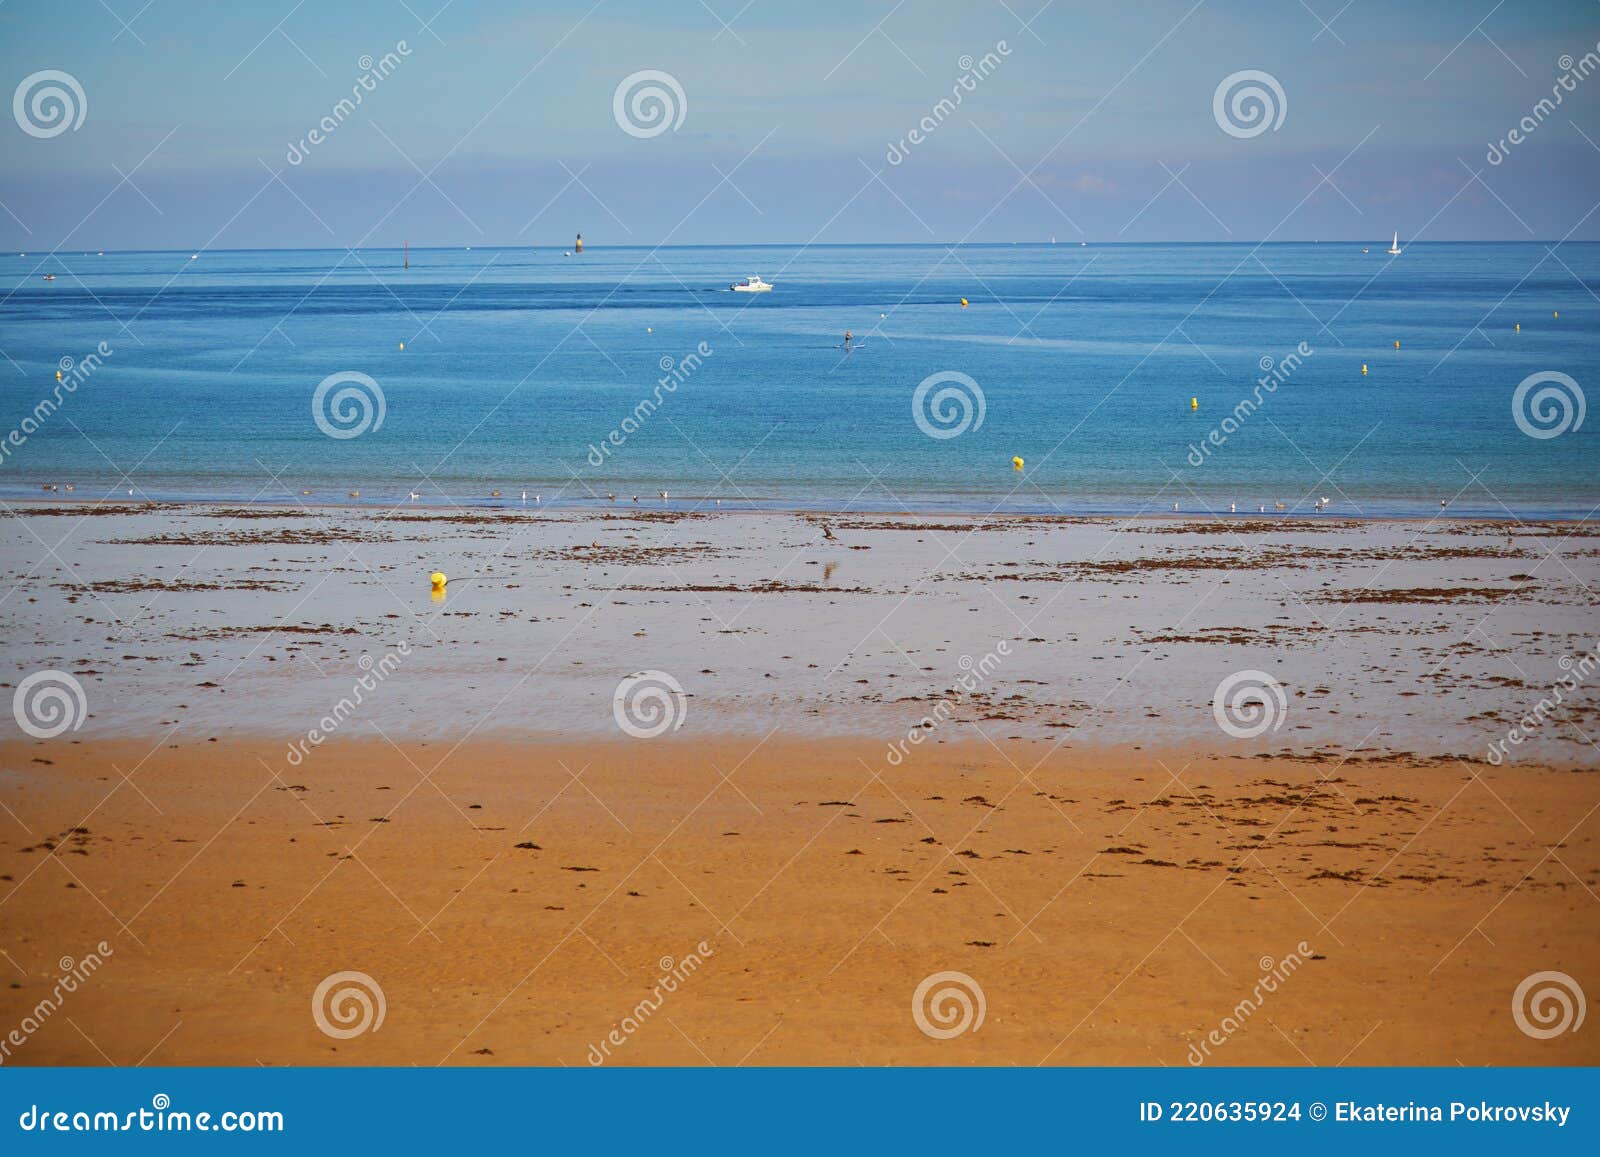 scenic view of plage du sillon beach in saint-malo, brittany, france